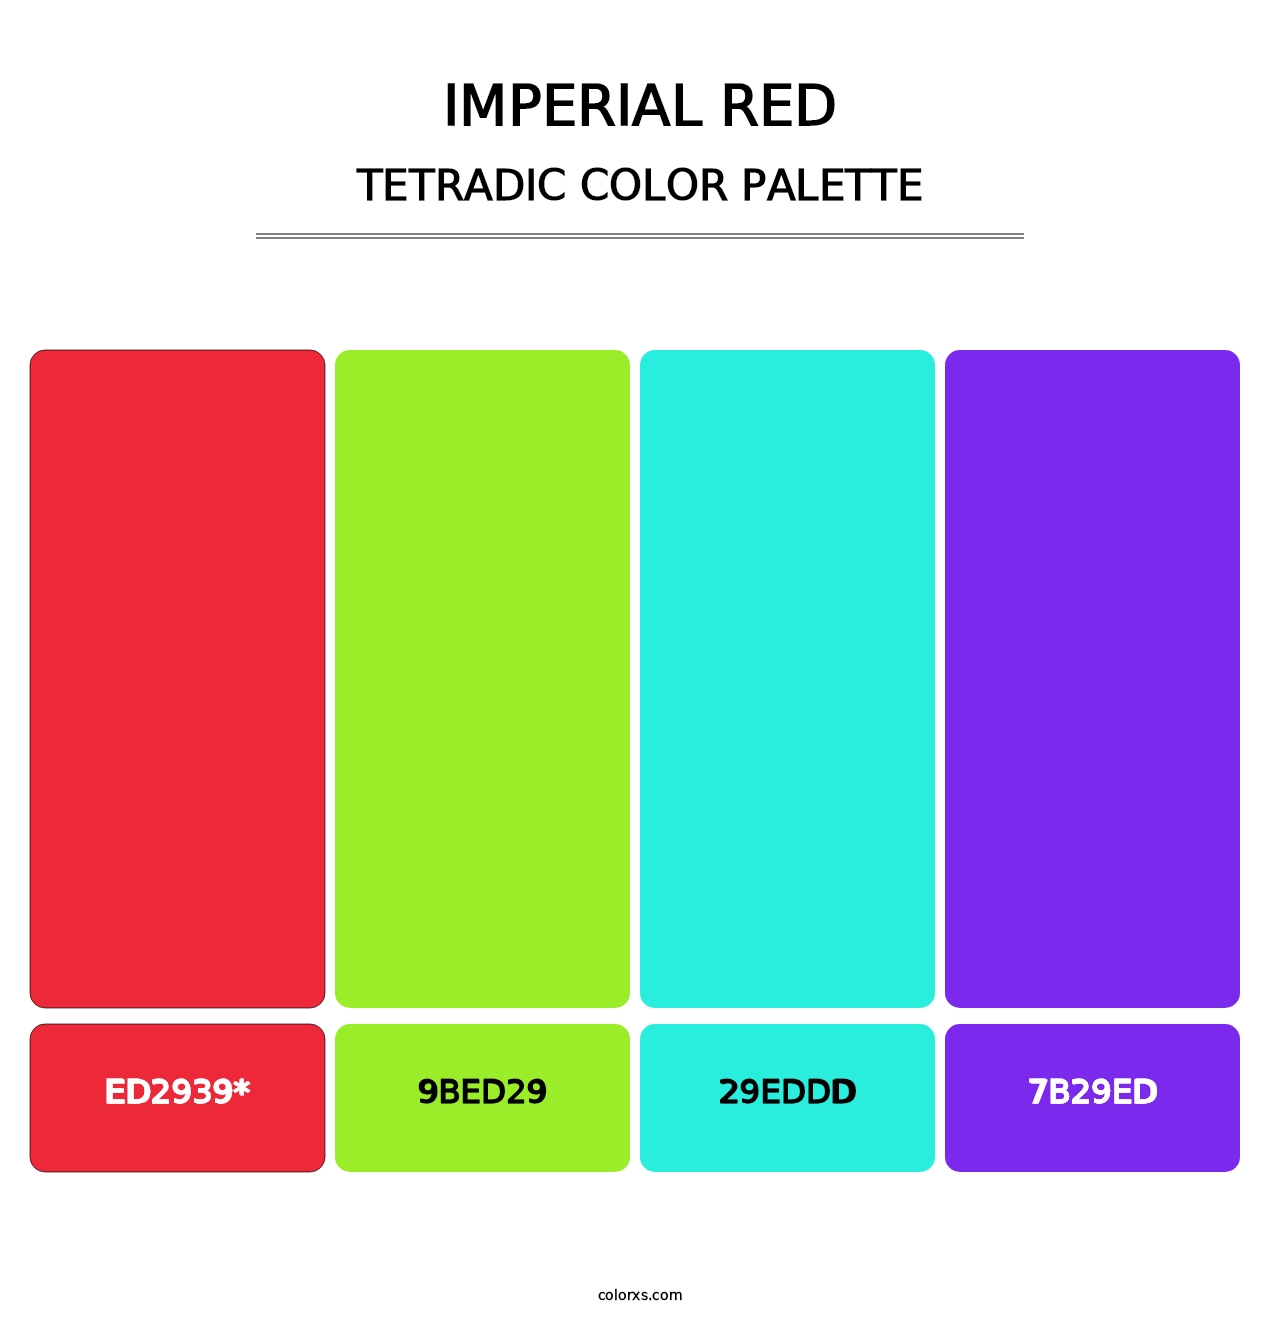 Imperial Red - Tetradic Color Palette